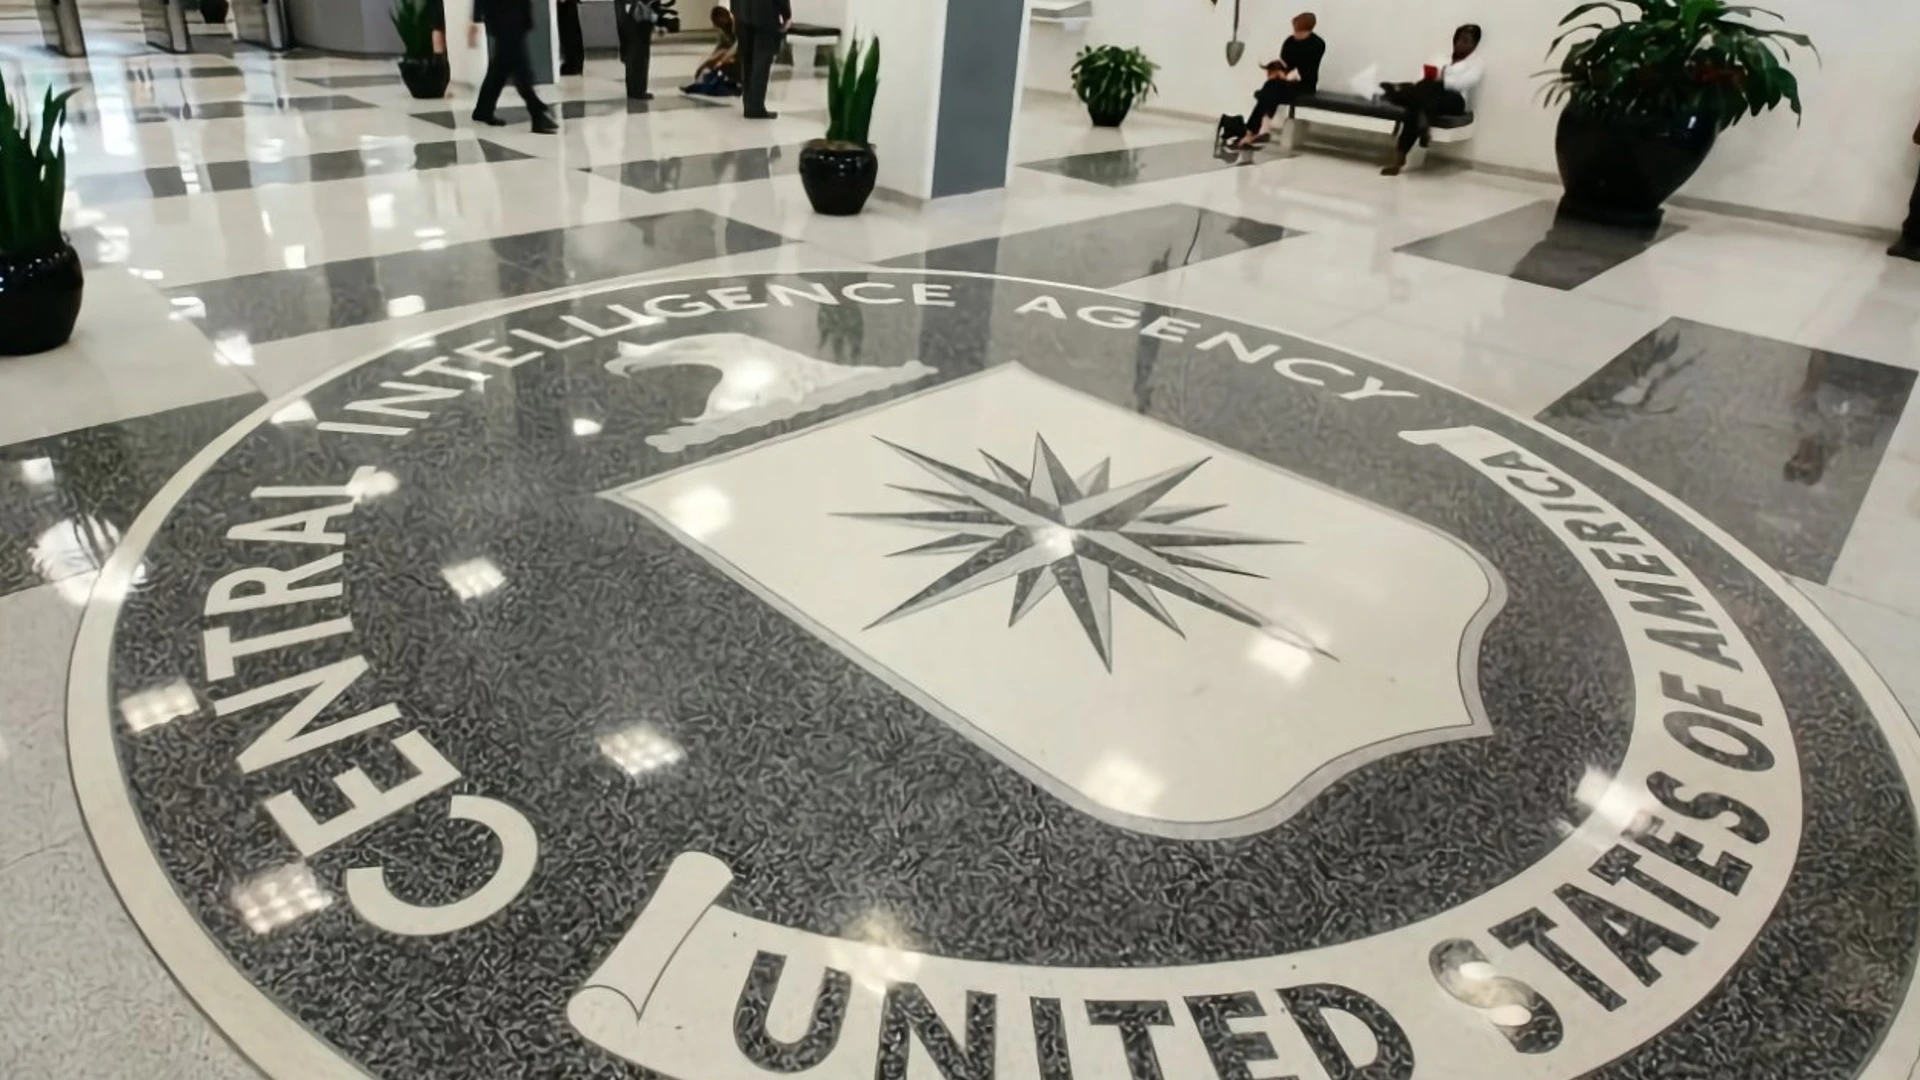 A Secret CIA Program May Have Compromised Us Citizens’ Privacy.